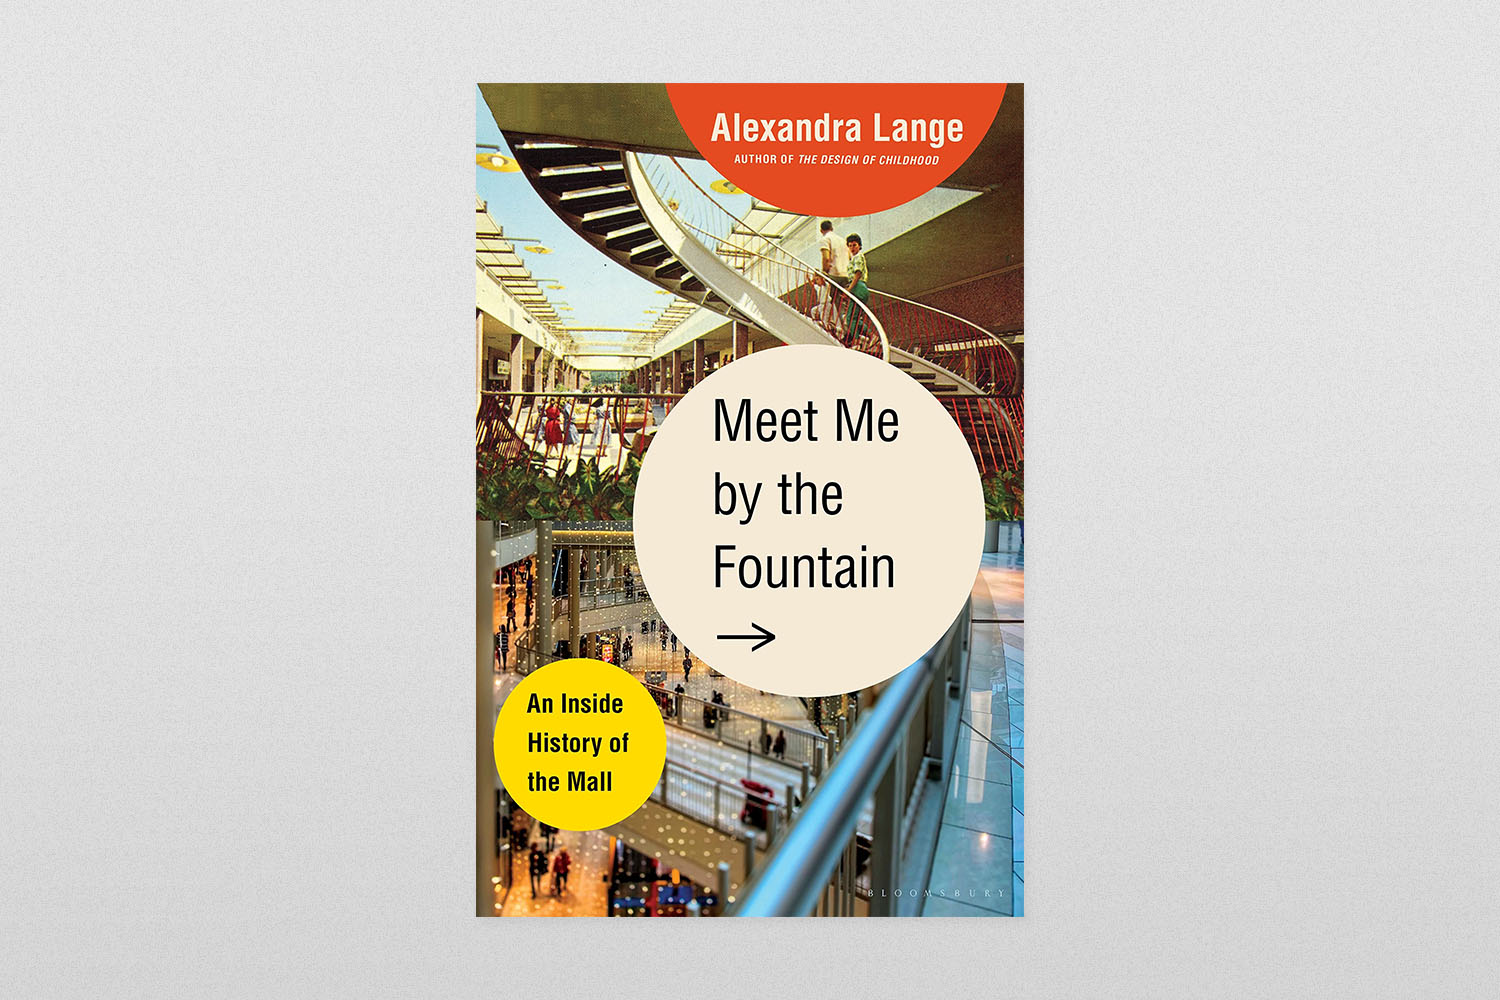 Meet Me by the Fountain- An Inside History of the Mall by Alexandra Lange